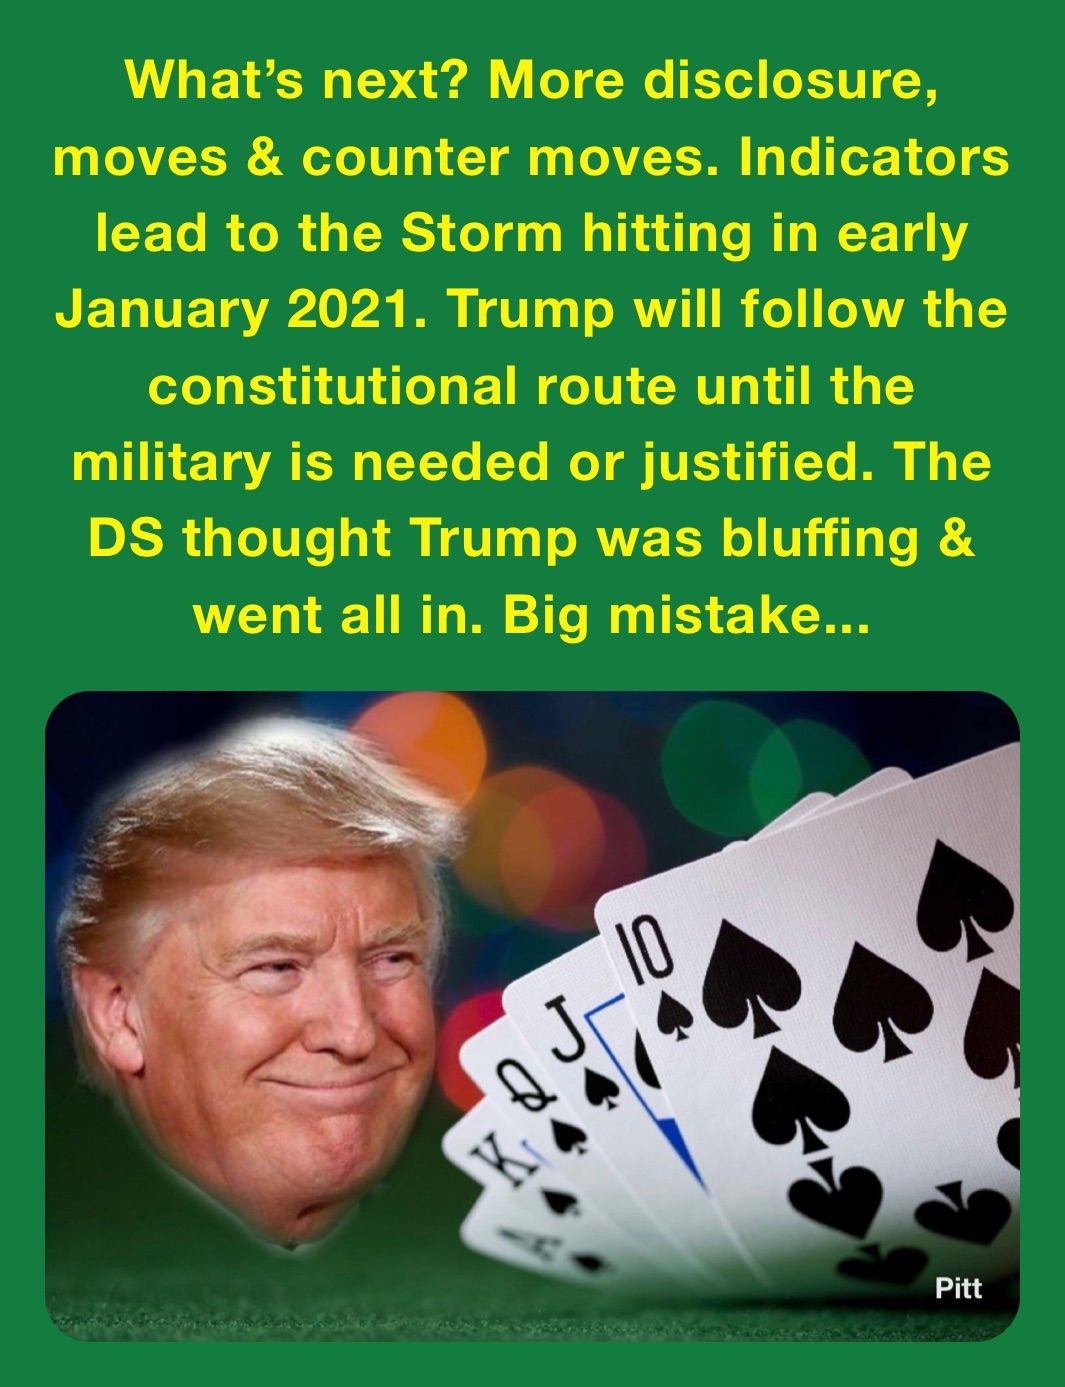 What’s next? More disclosure, moves & counter moves. Indicators lead to the Storm hitting in early January 2021. Trump will follow the constitutional route until the military is needed or justified. The DS thought Trump was bluffing & went all in. Big mistake...